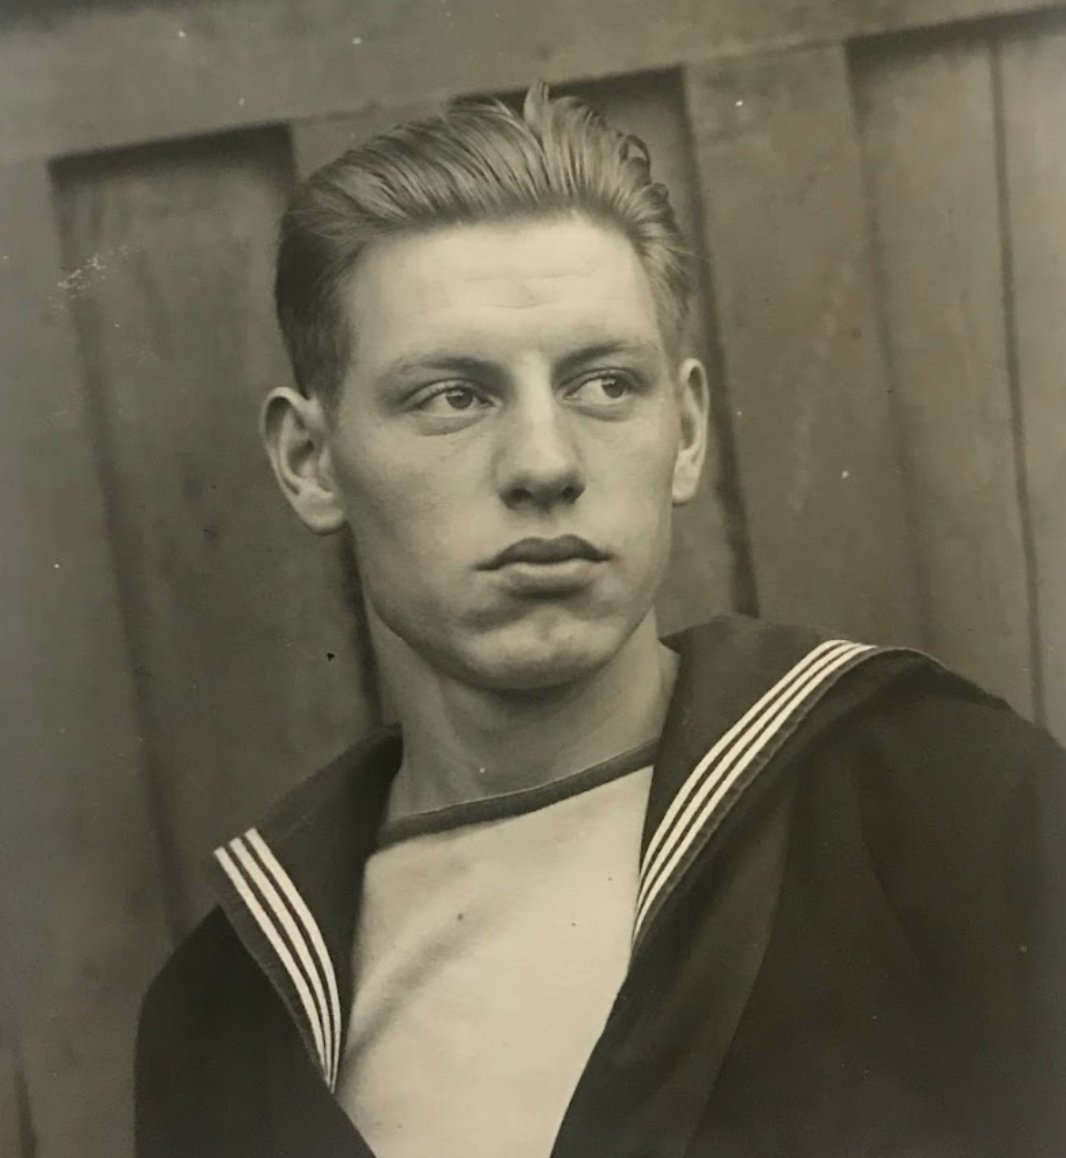 There are also quite a few pics of this sailor, Art Andres (or possible Ardies/Andies). I suspect Jimmy sent these because they aren't amateur snapshots.